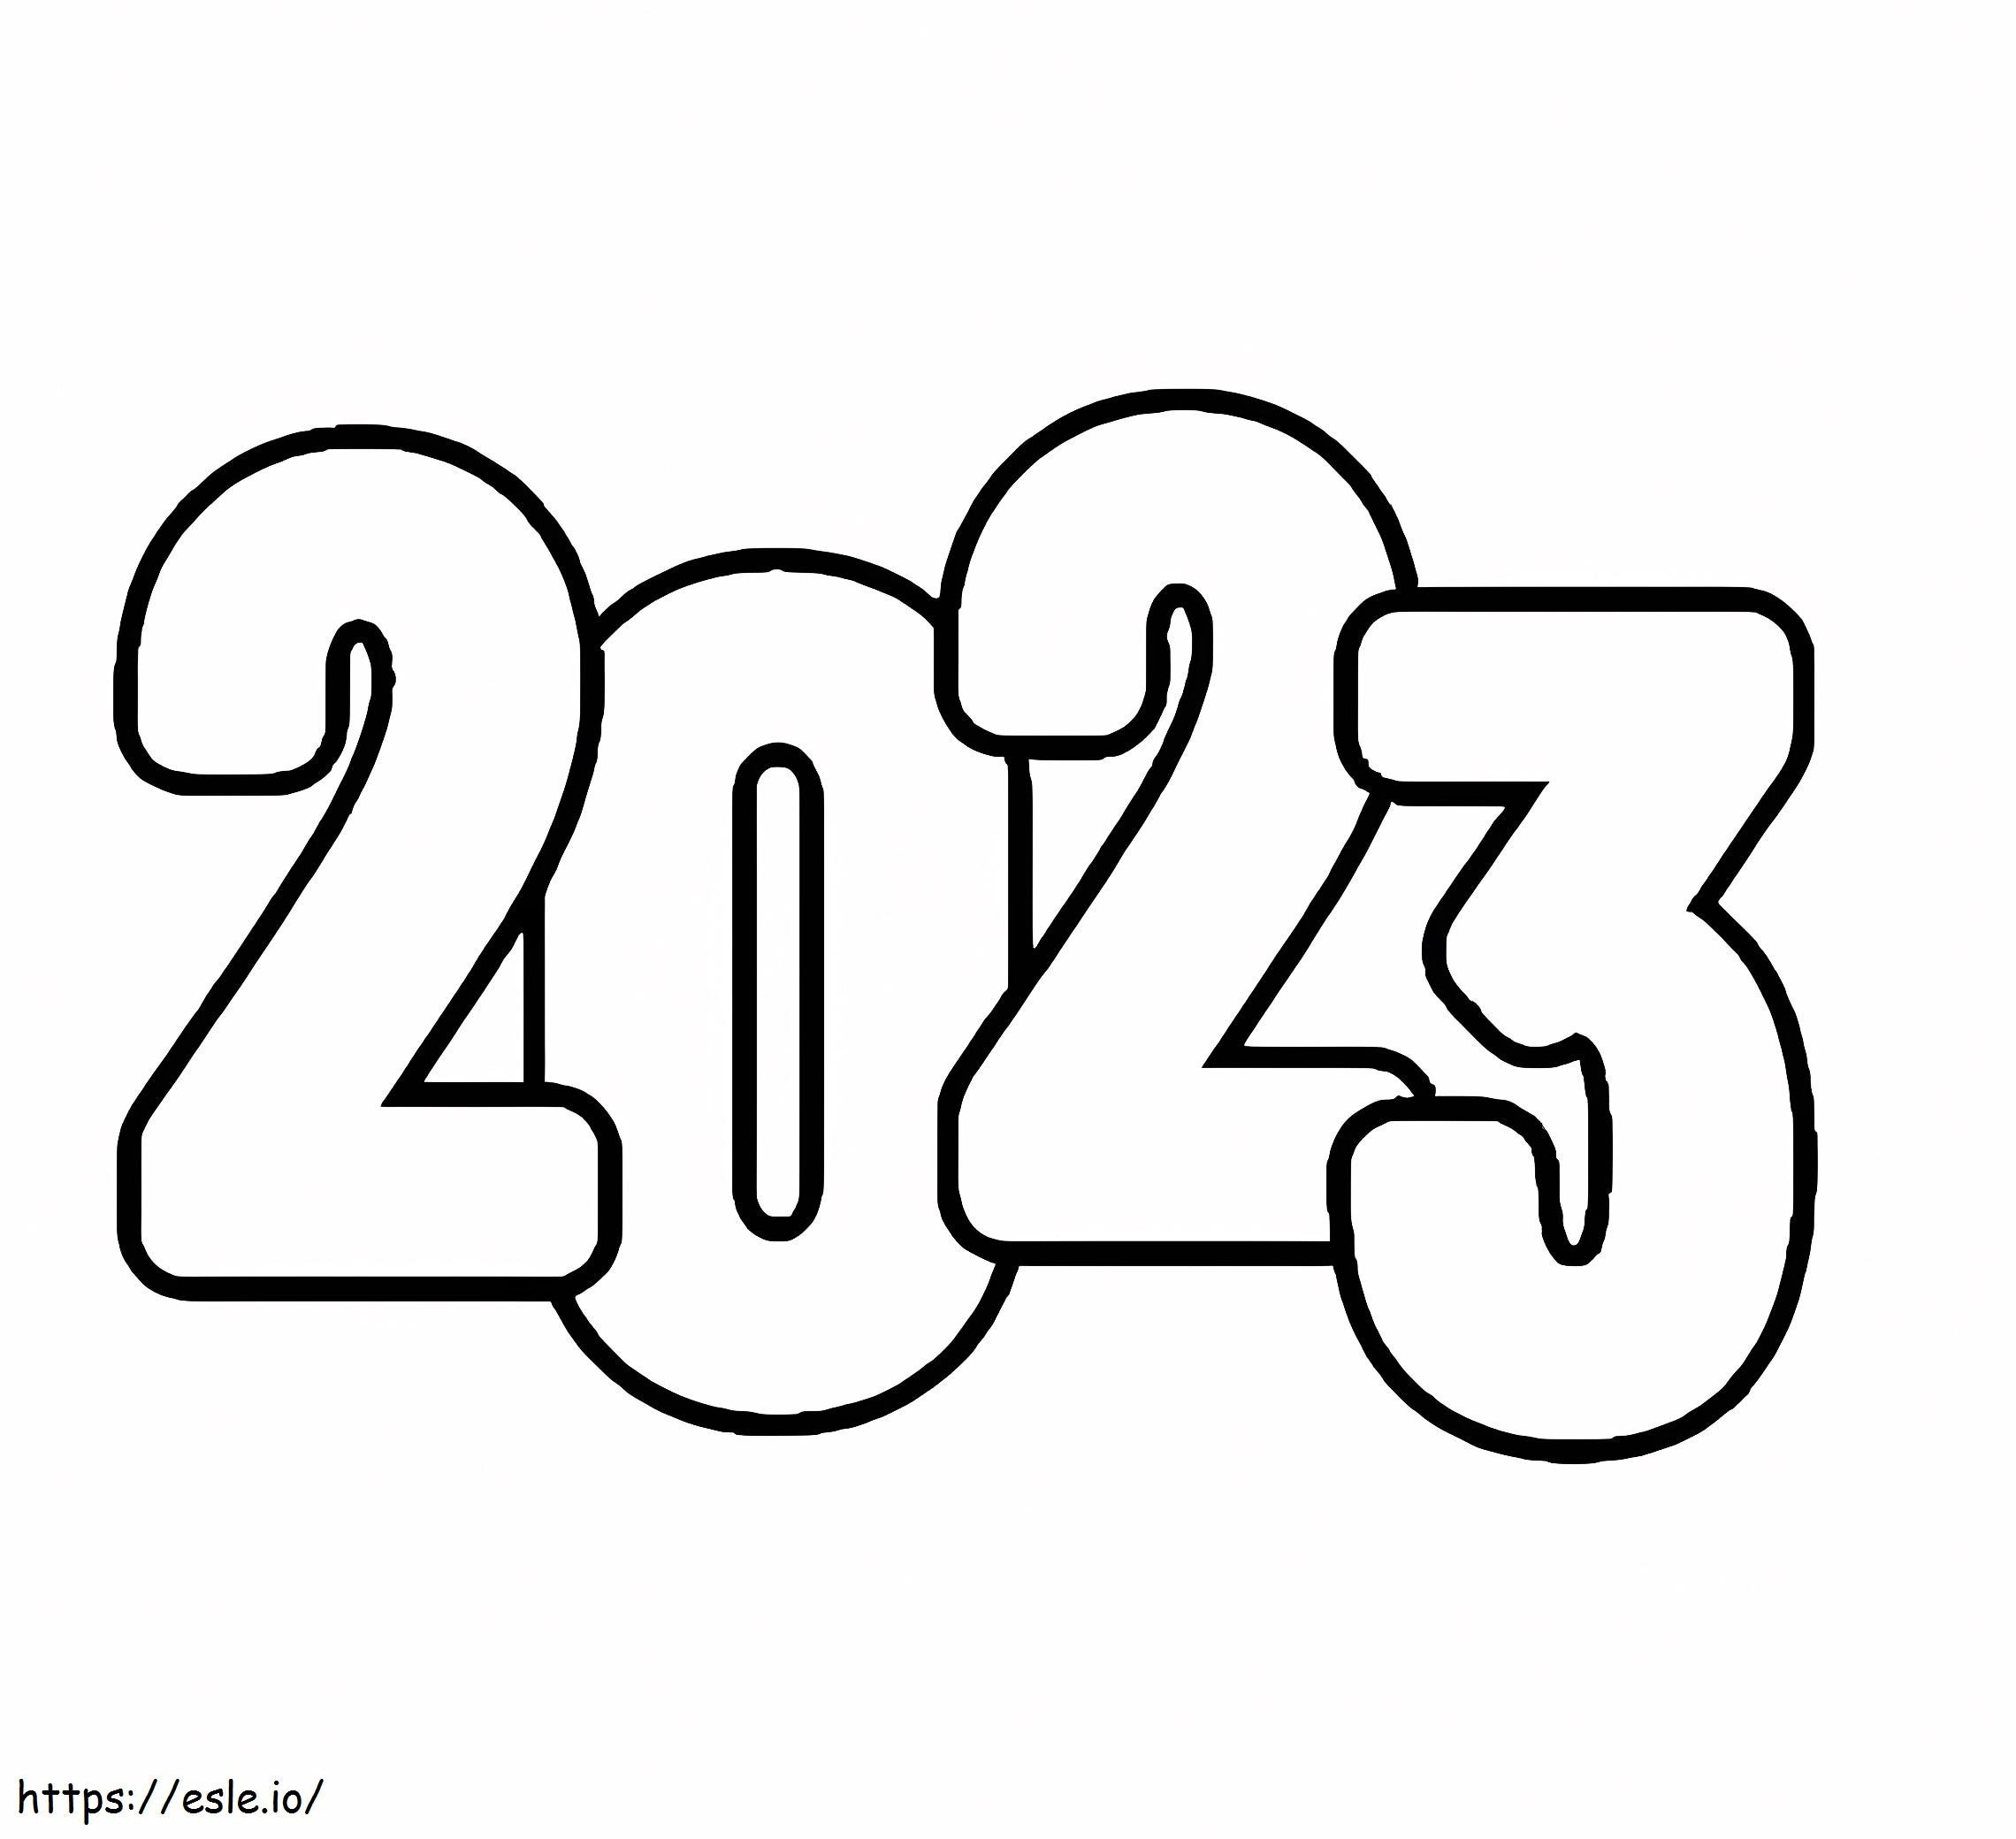 2023 coloring page